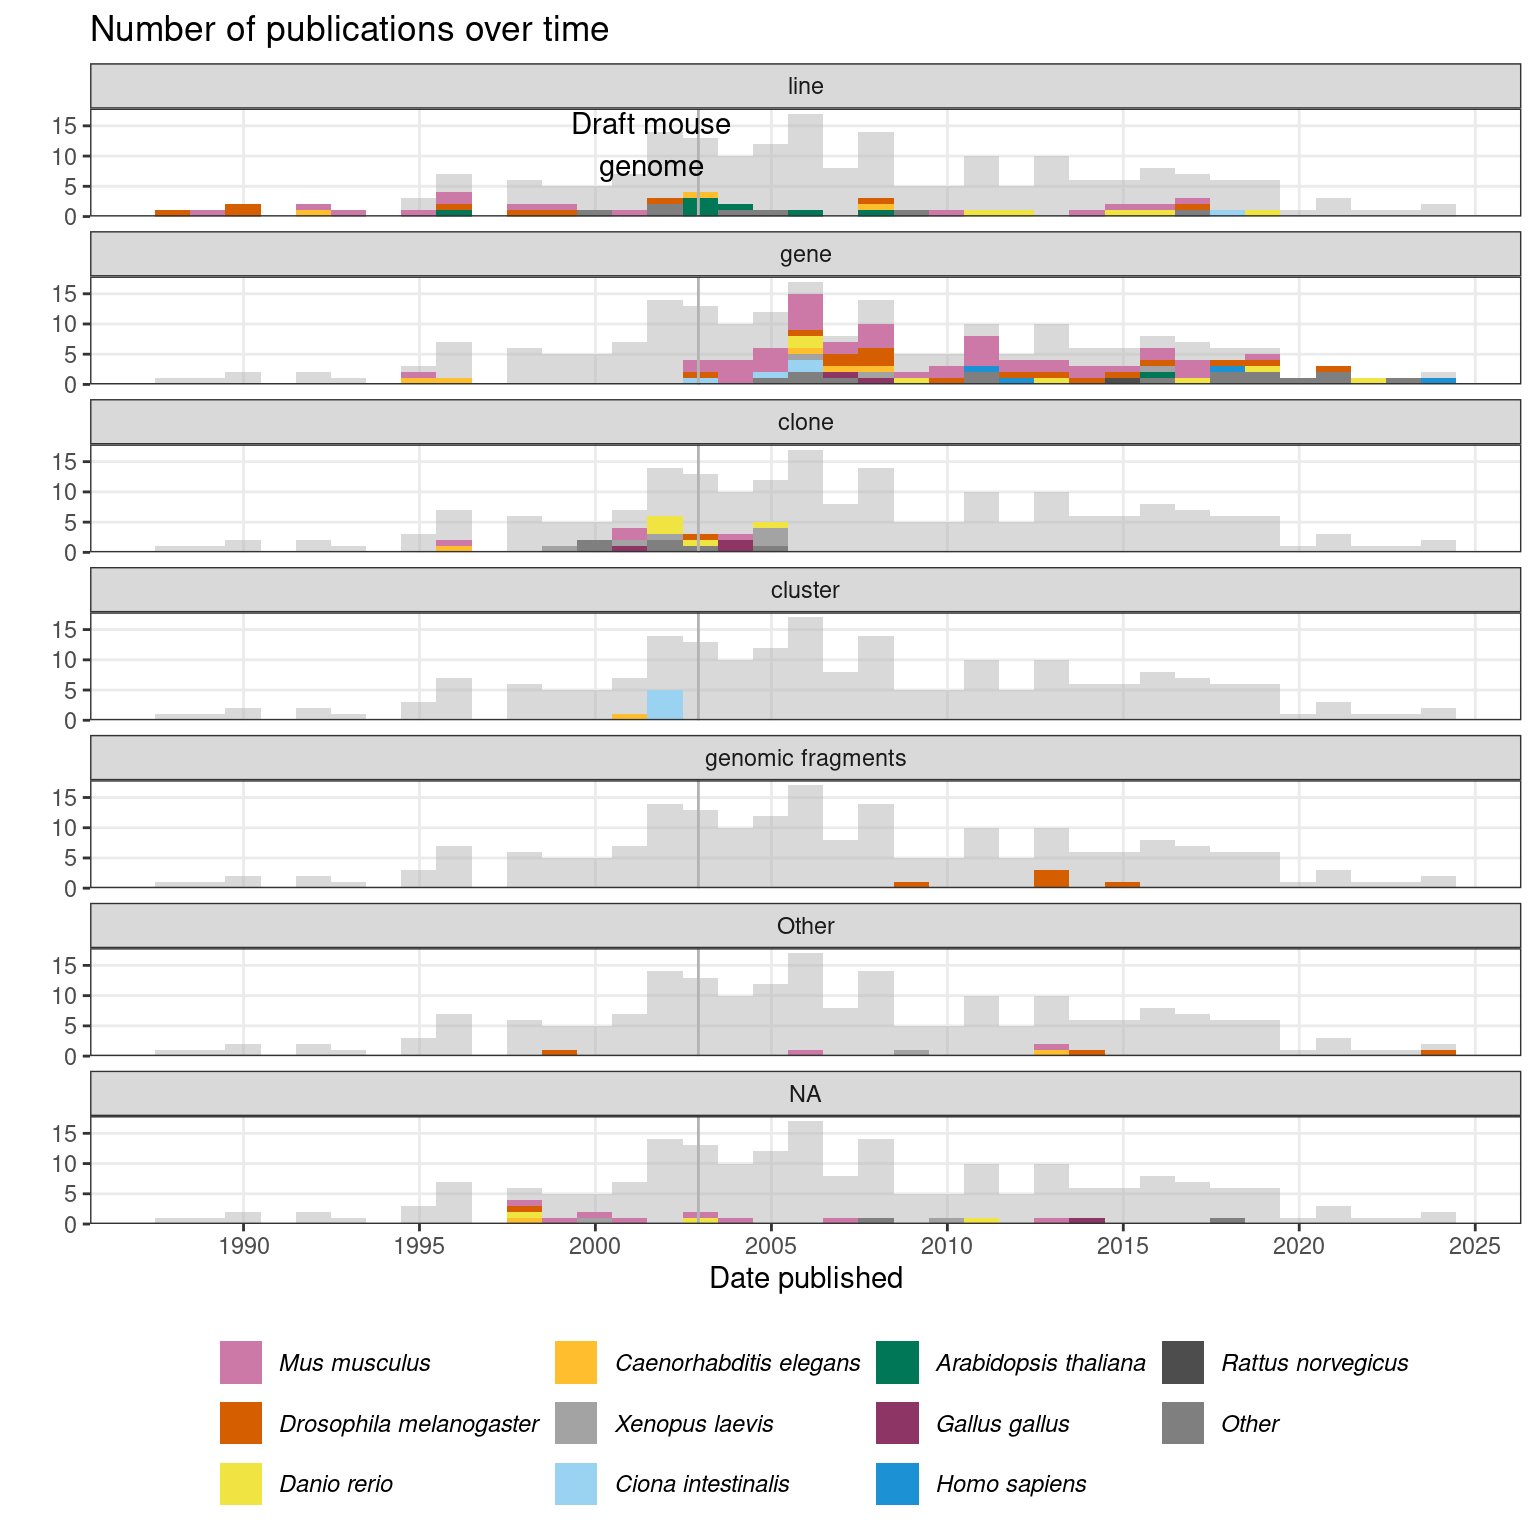 Number of prequel publications over time, broken down by what the entities stained for were called and colored by species. Bin width is 365 days. Vertical line marks the date when the draft mouse reference genome was published (Waterston et al. 2002), as context of transition from “clone” and “line” to “gene”.